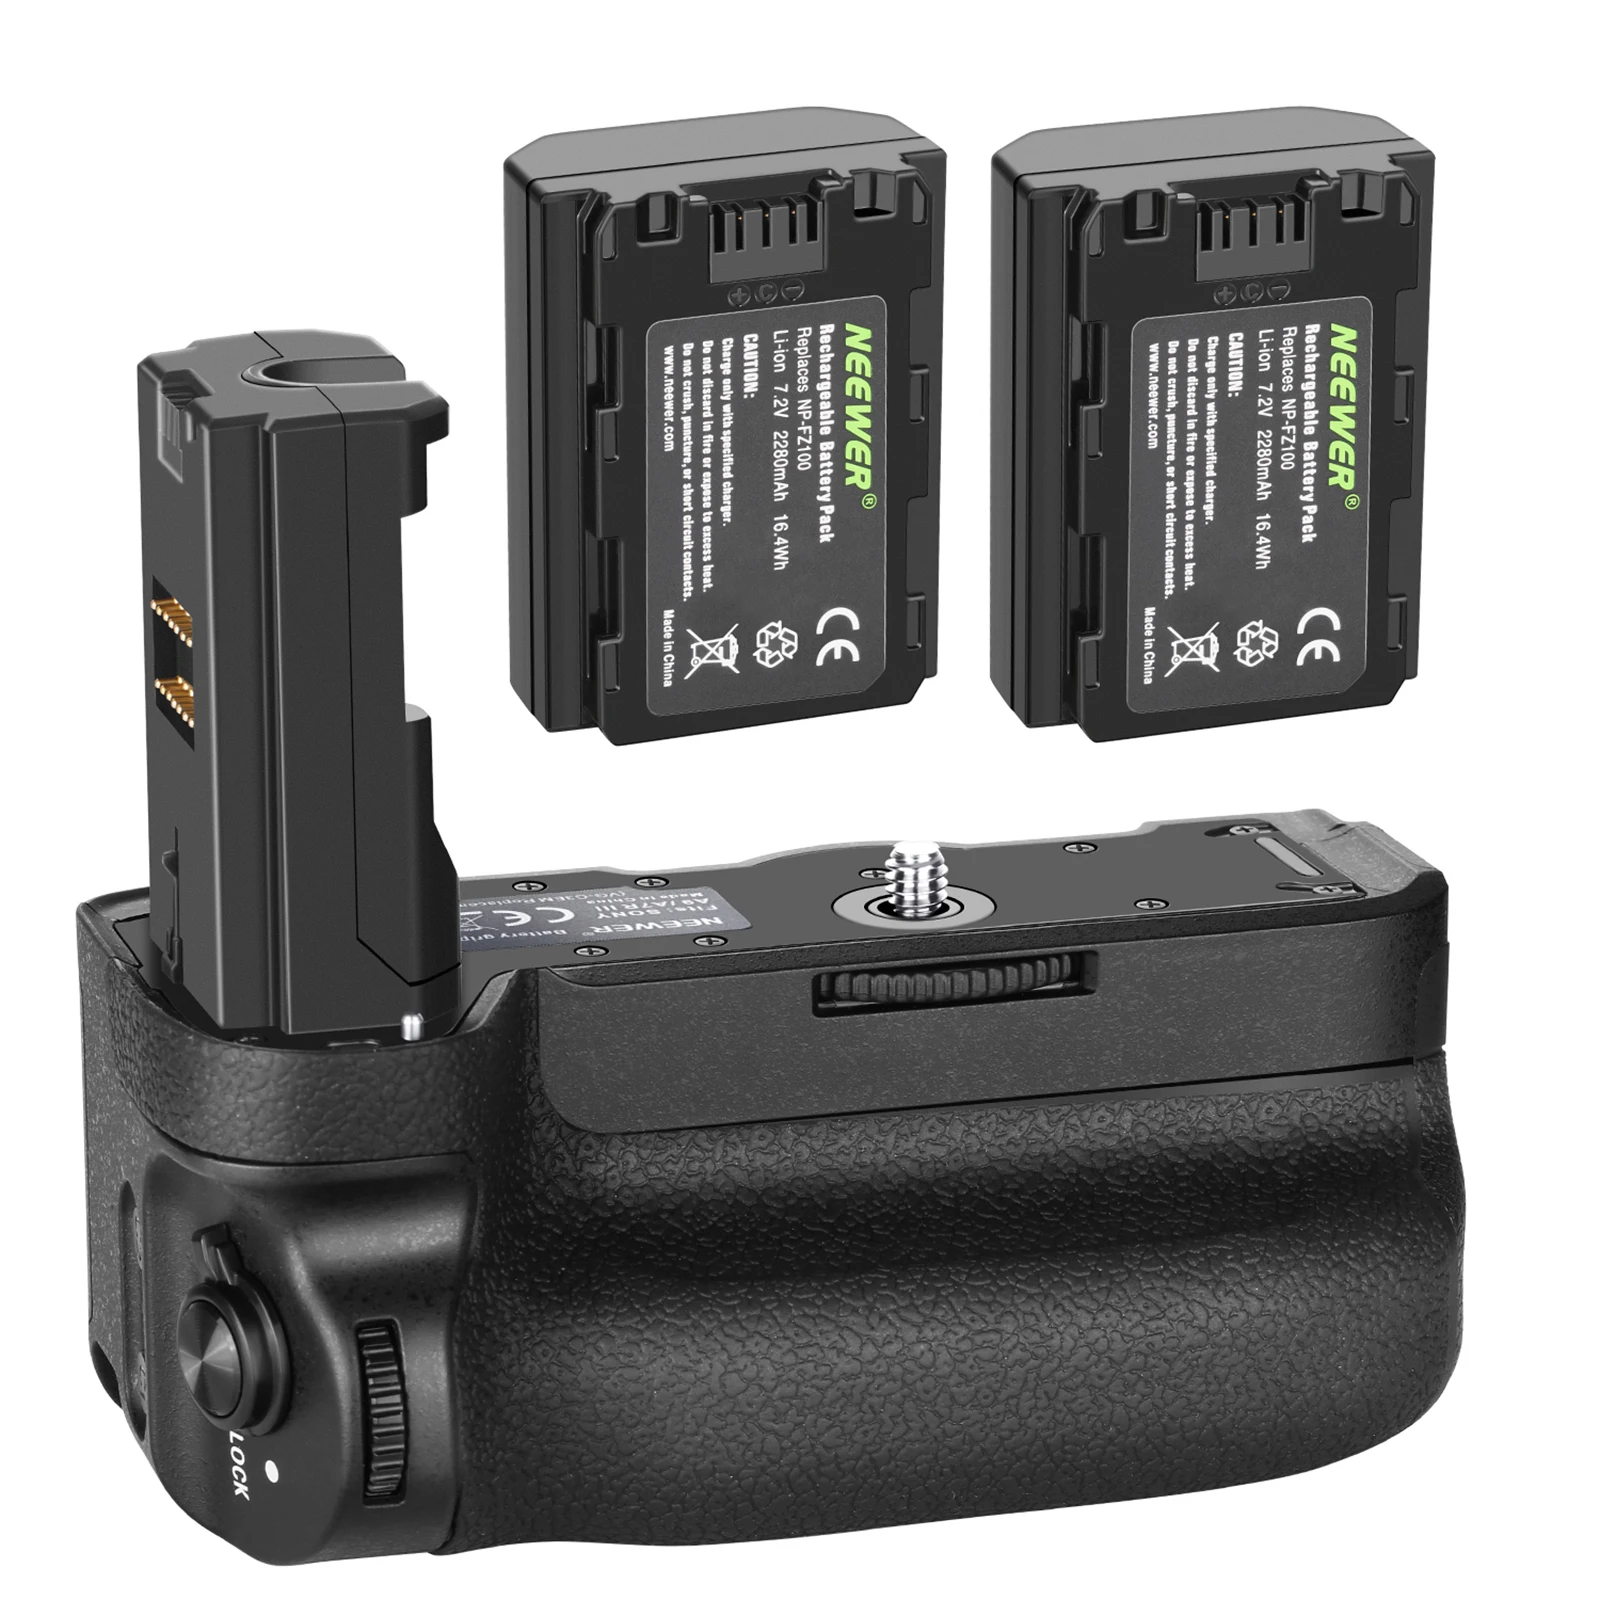 Neewer Vertical Battery Grip for Sony A9 A7III A7RIII Cameras, Replacement for Sony VG-C3EM with 2 Rechargeable Li-ion Battery